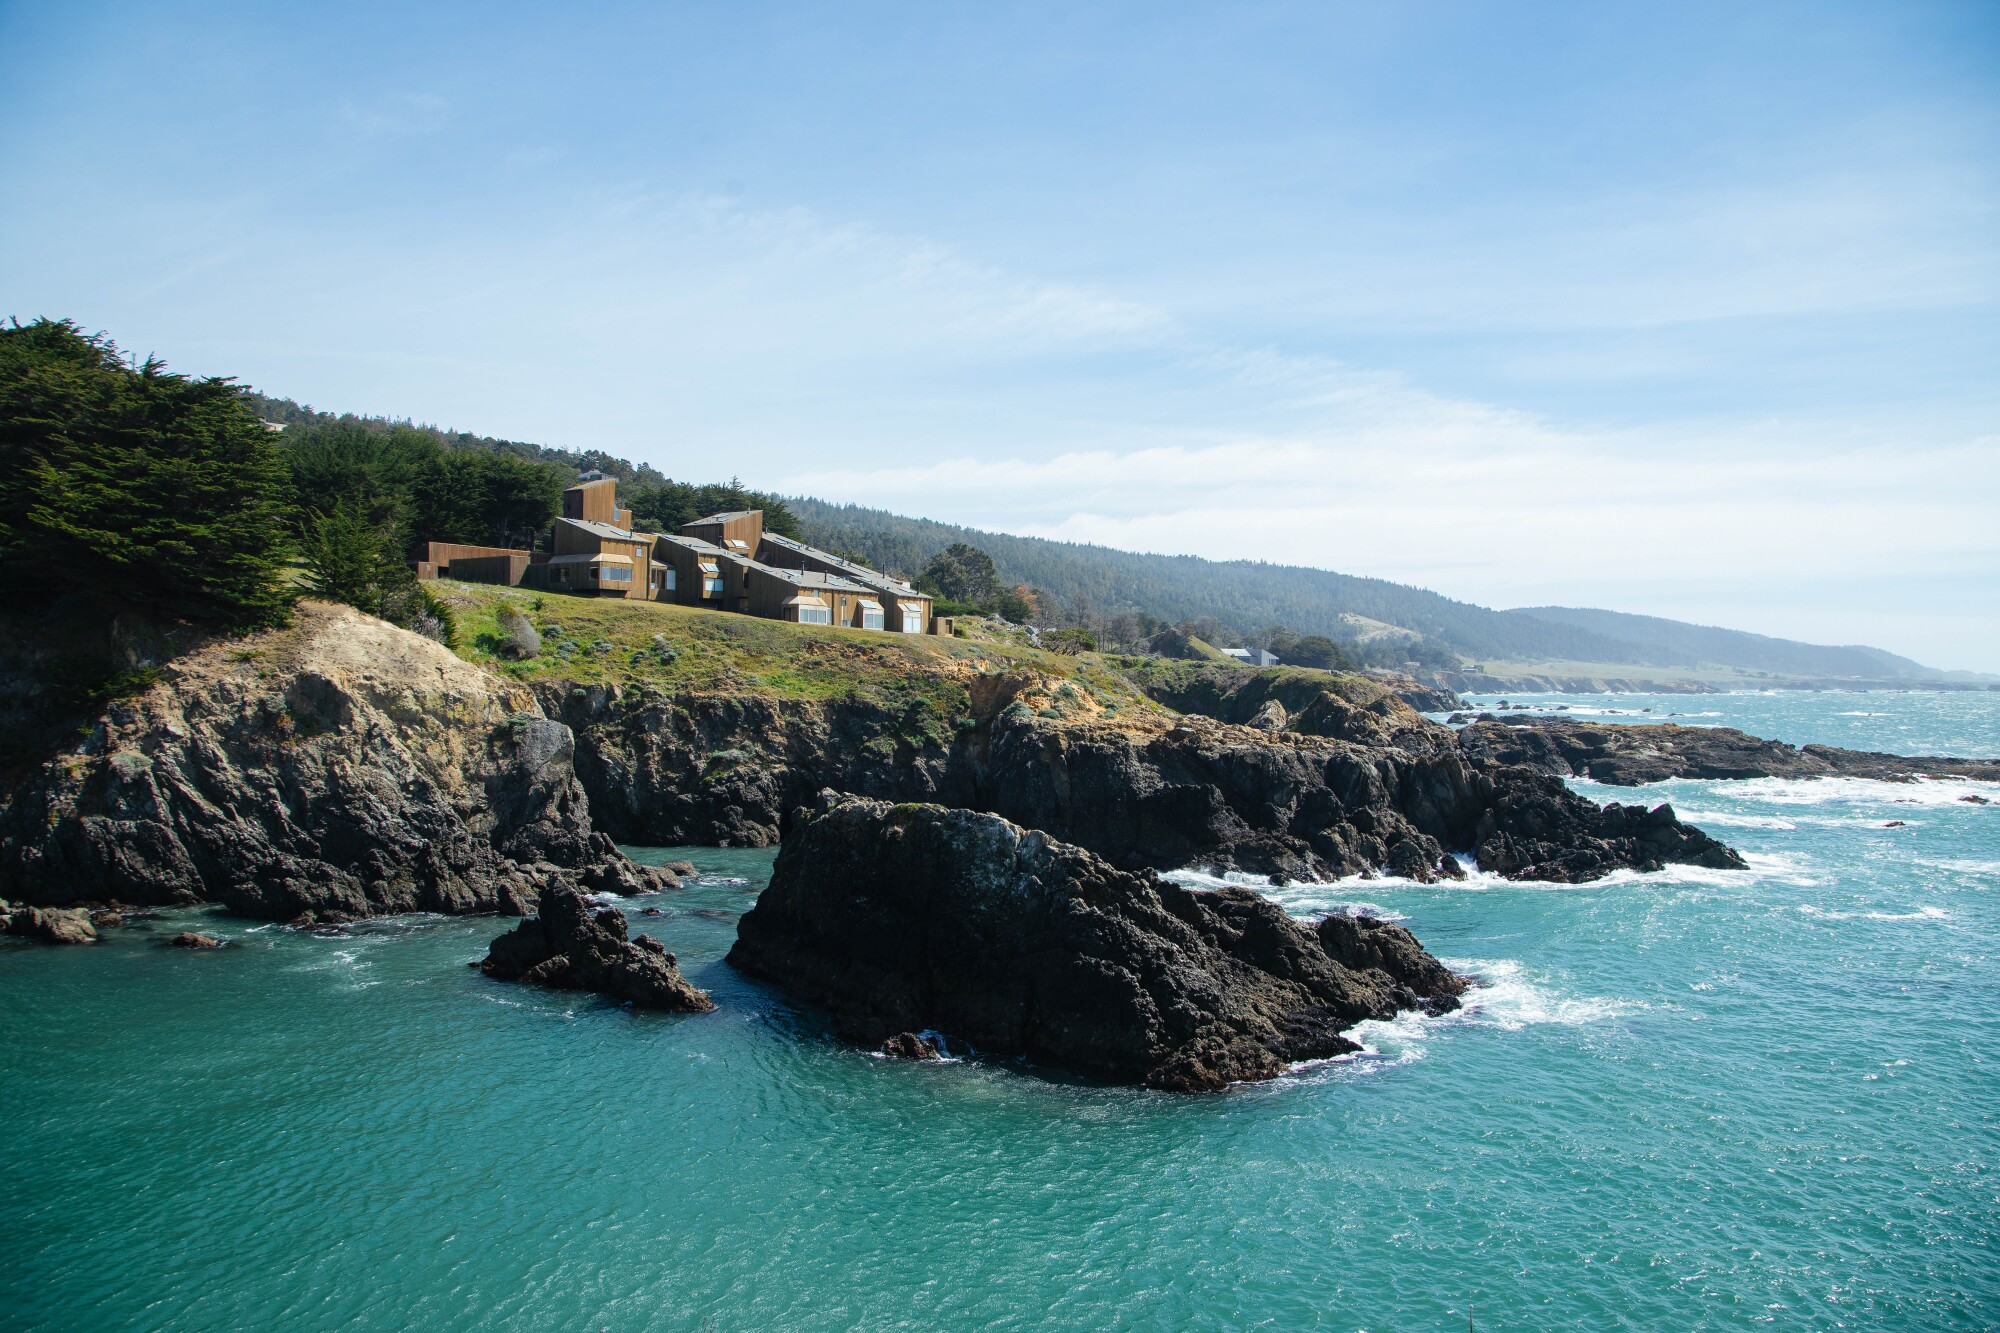 A building on a bluff overlooking a rocky coastline and the Pacific Ocean.